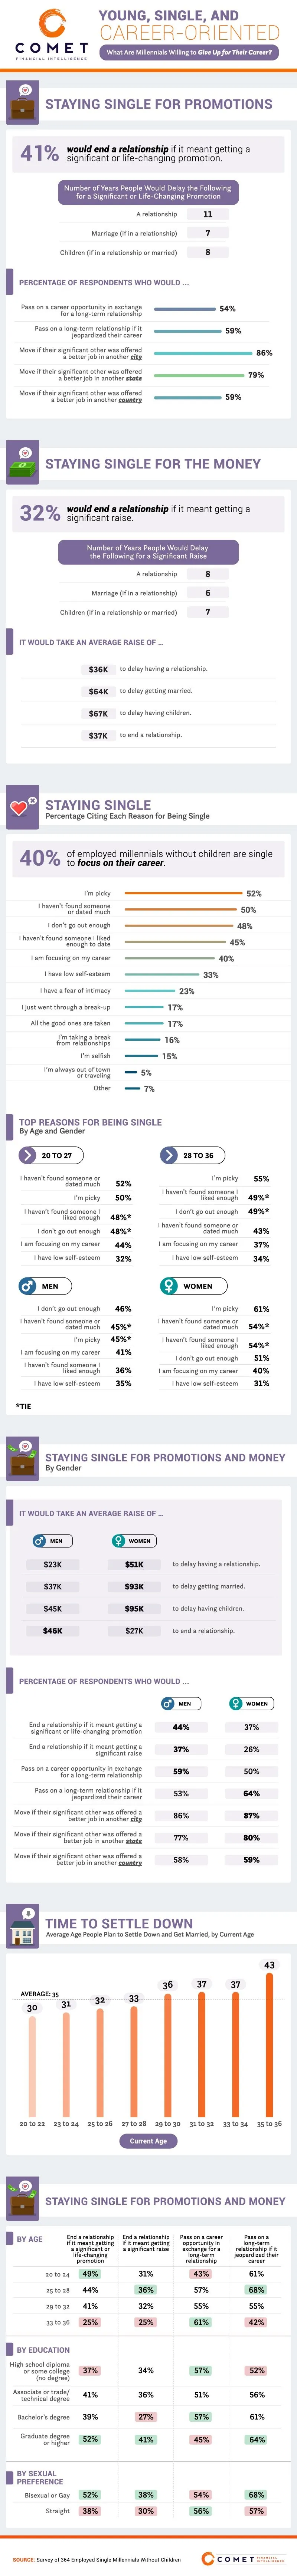 This infographic reveals how many young people would stay single to focus on work and how many would break up with a significant other if it meant getting a promotion or raise. Keep reading to learn more.